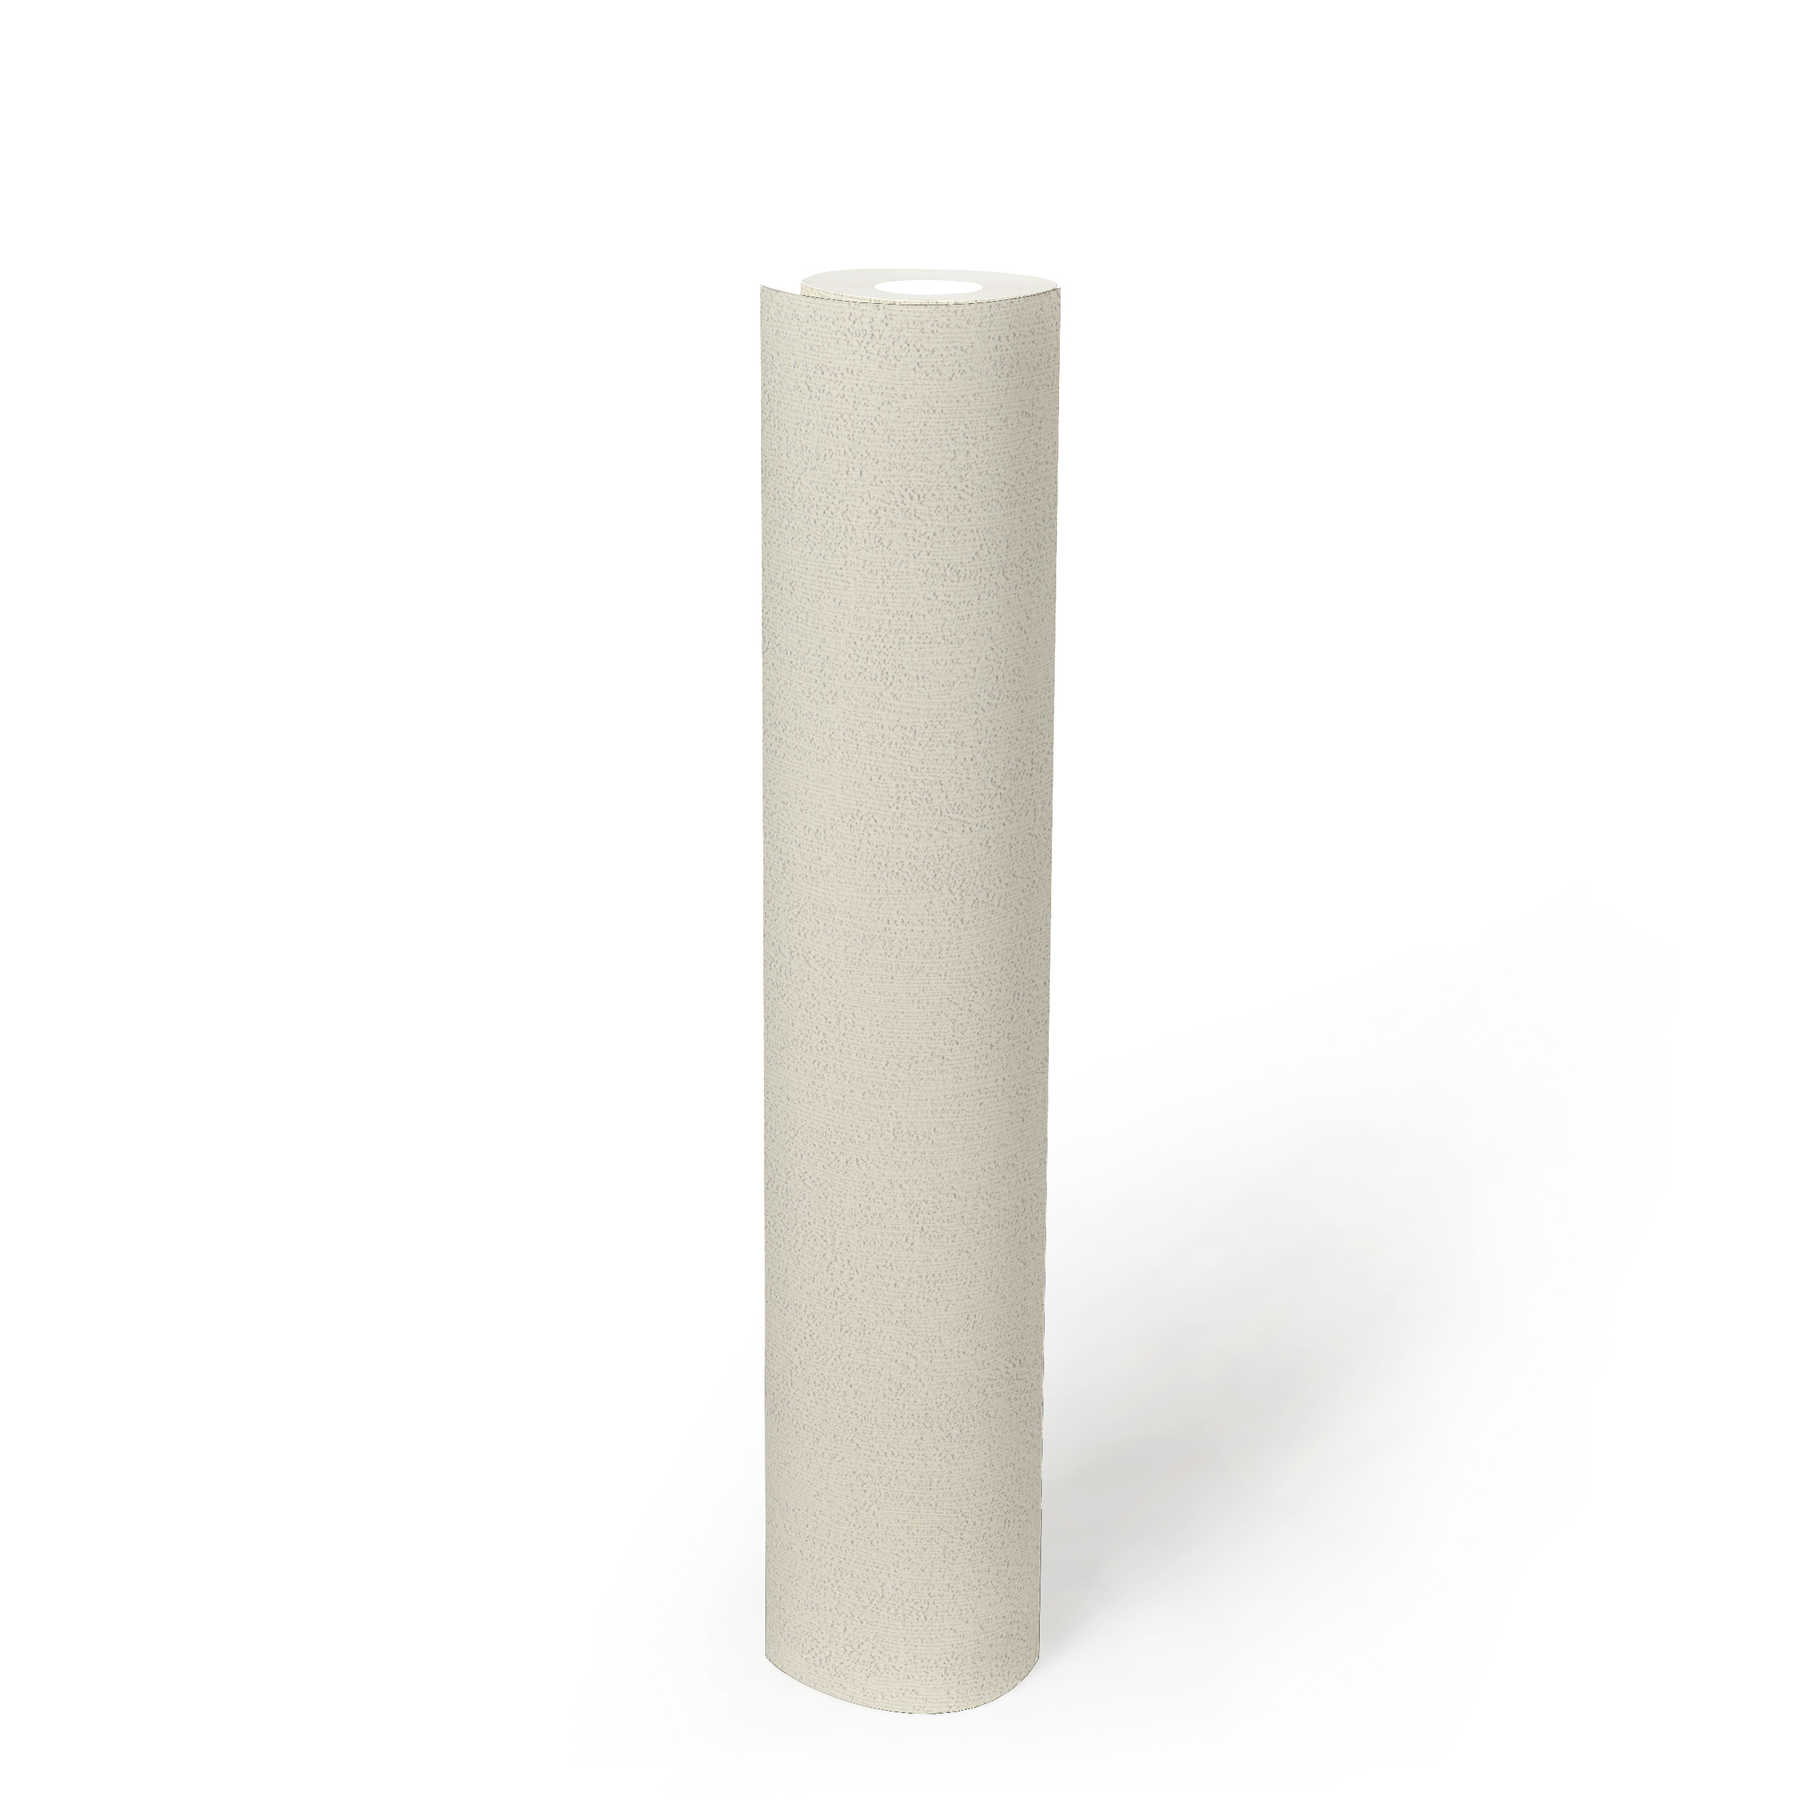             Plain wallpaper white with grained wood texture
        